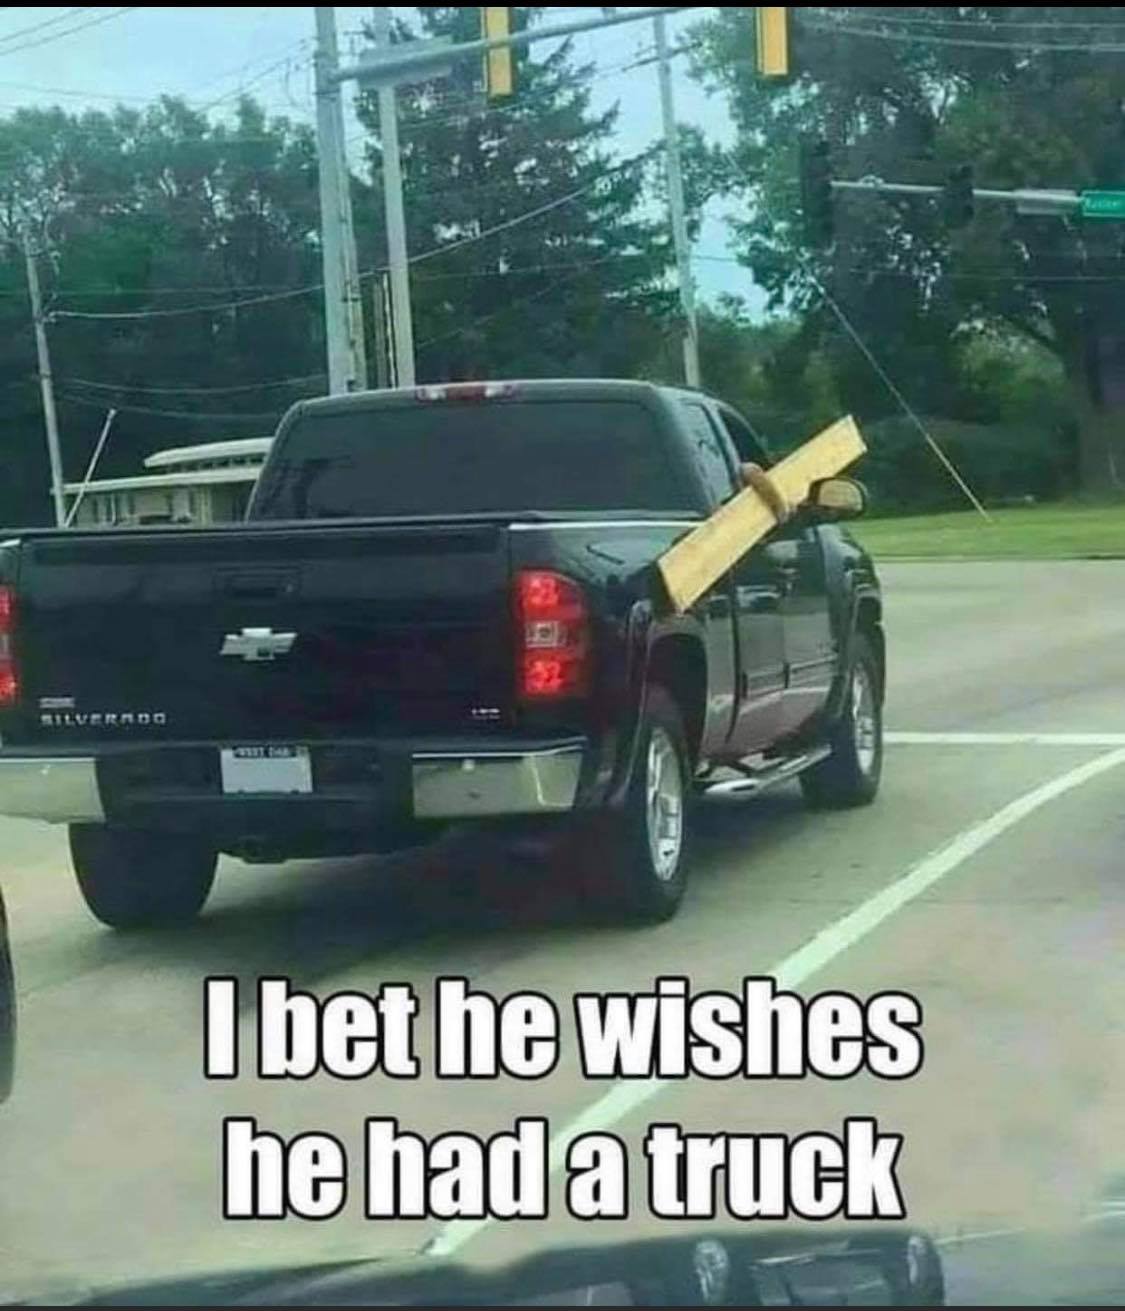 Car memes - Silverado I bet he wishes he had a truck